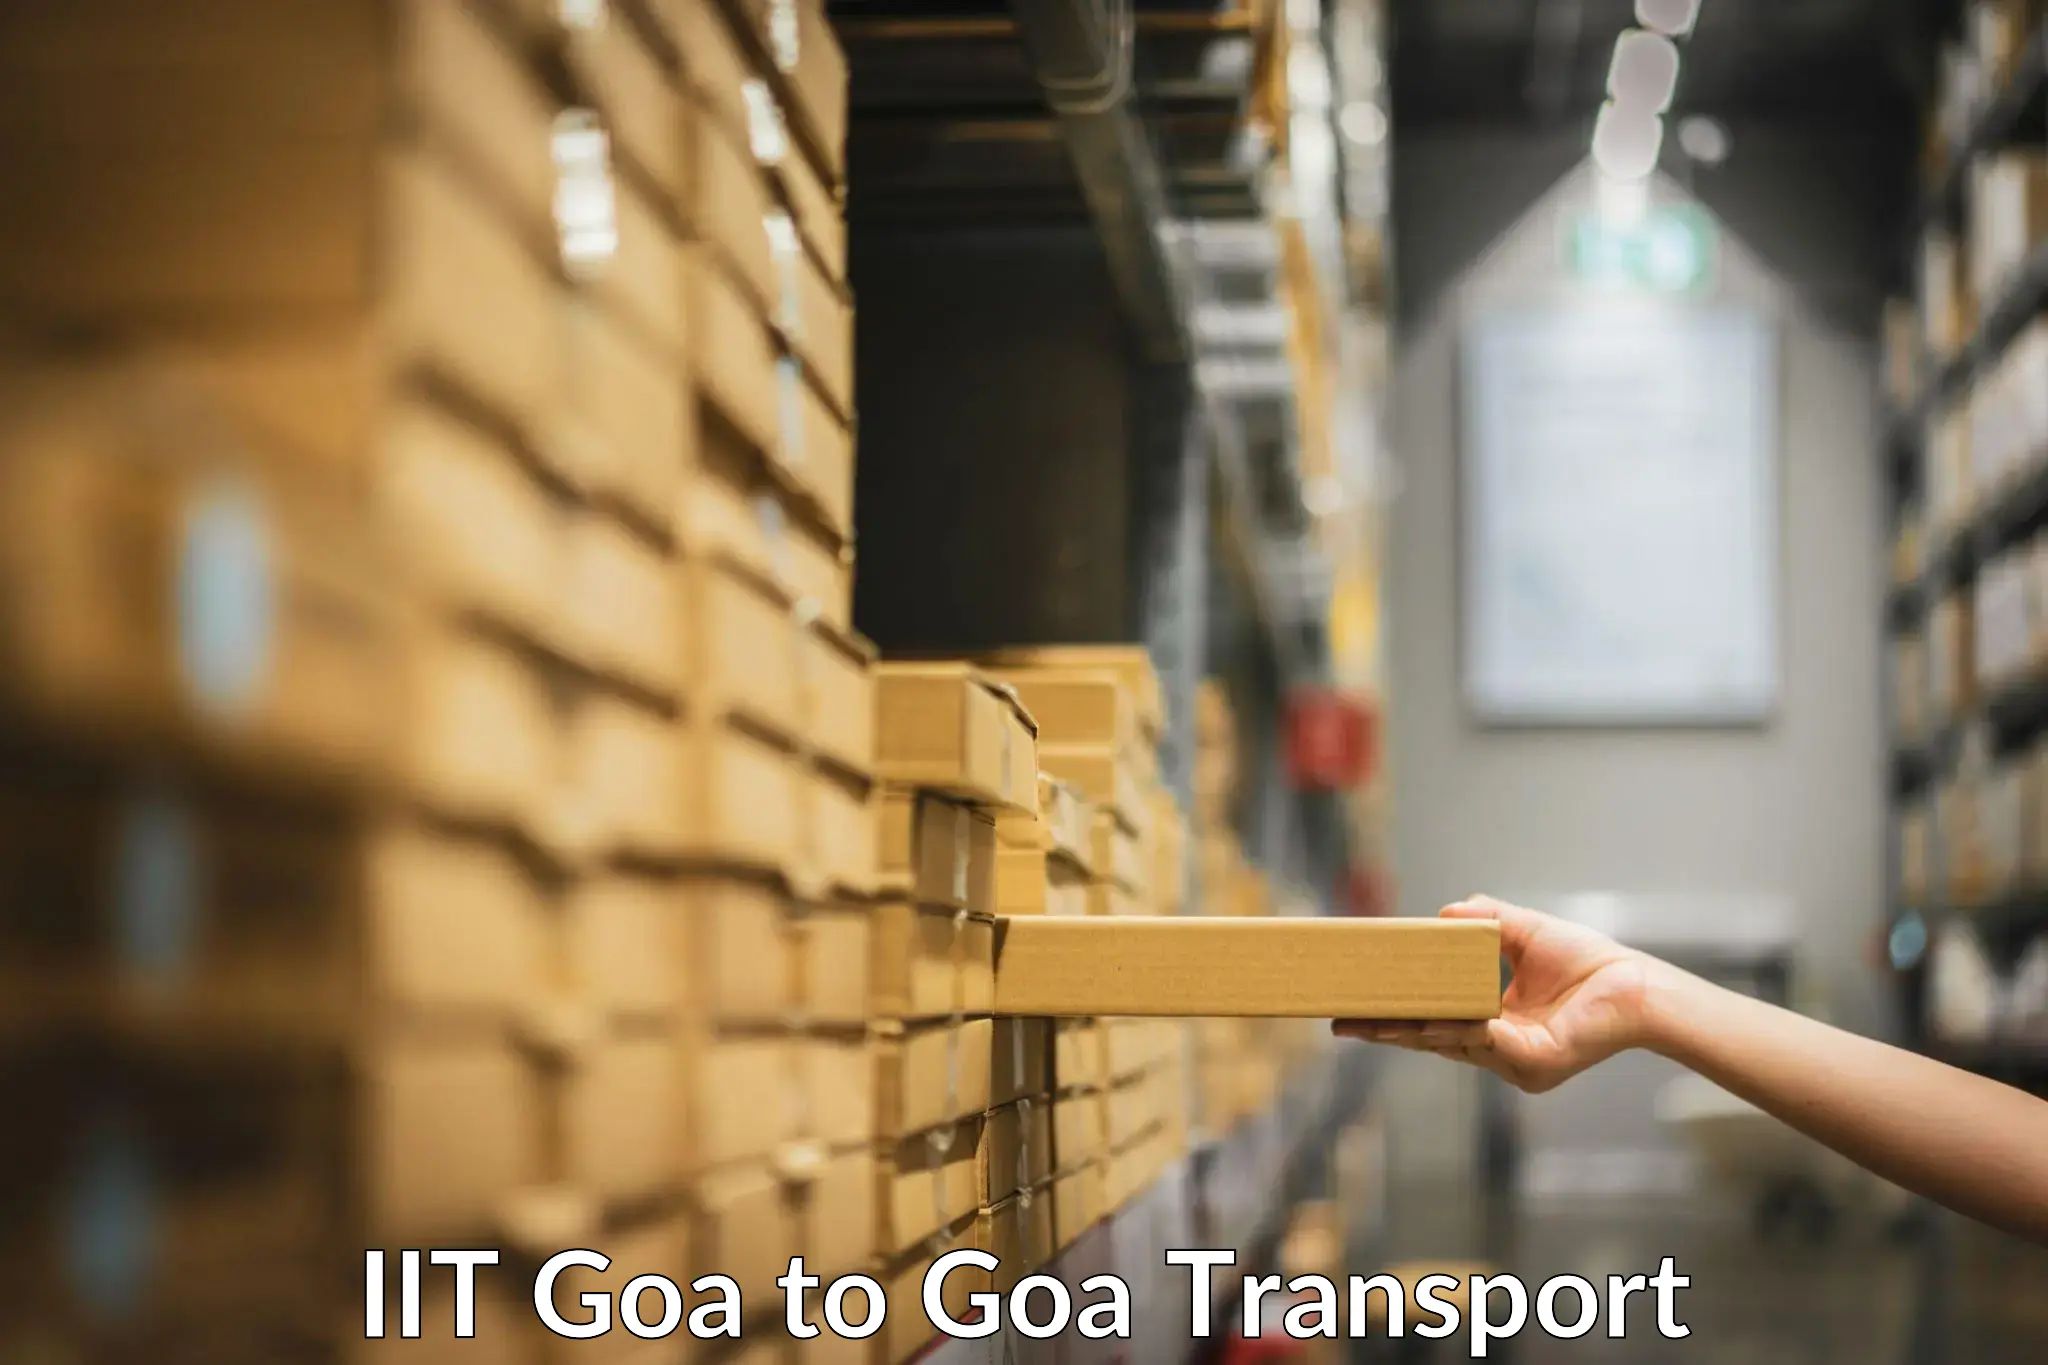 Nearby transport service IIT Goa to Margao